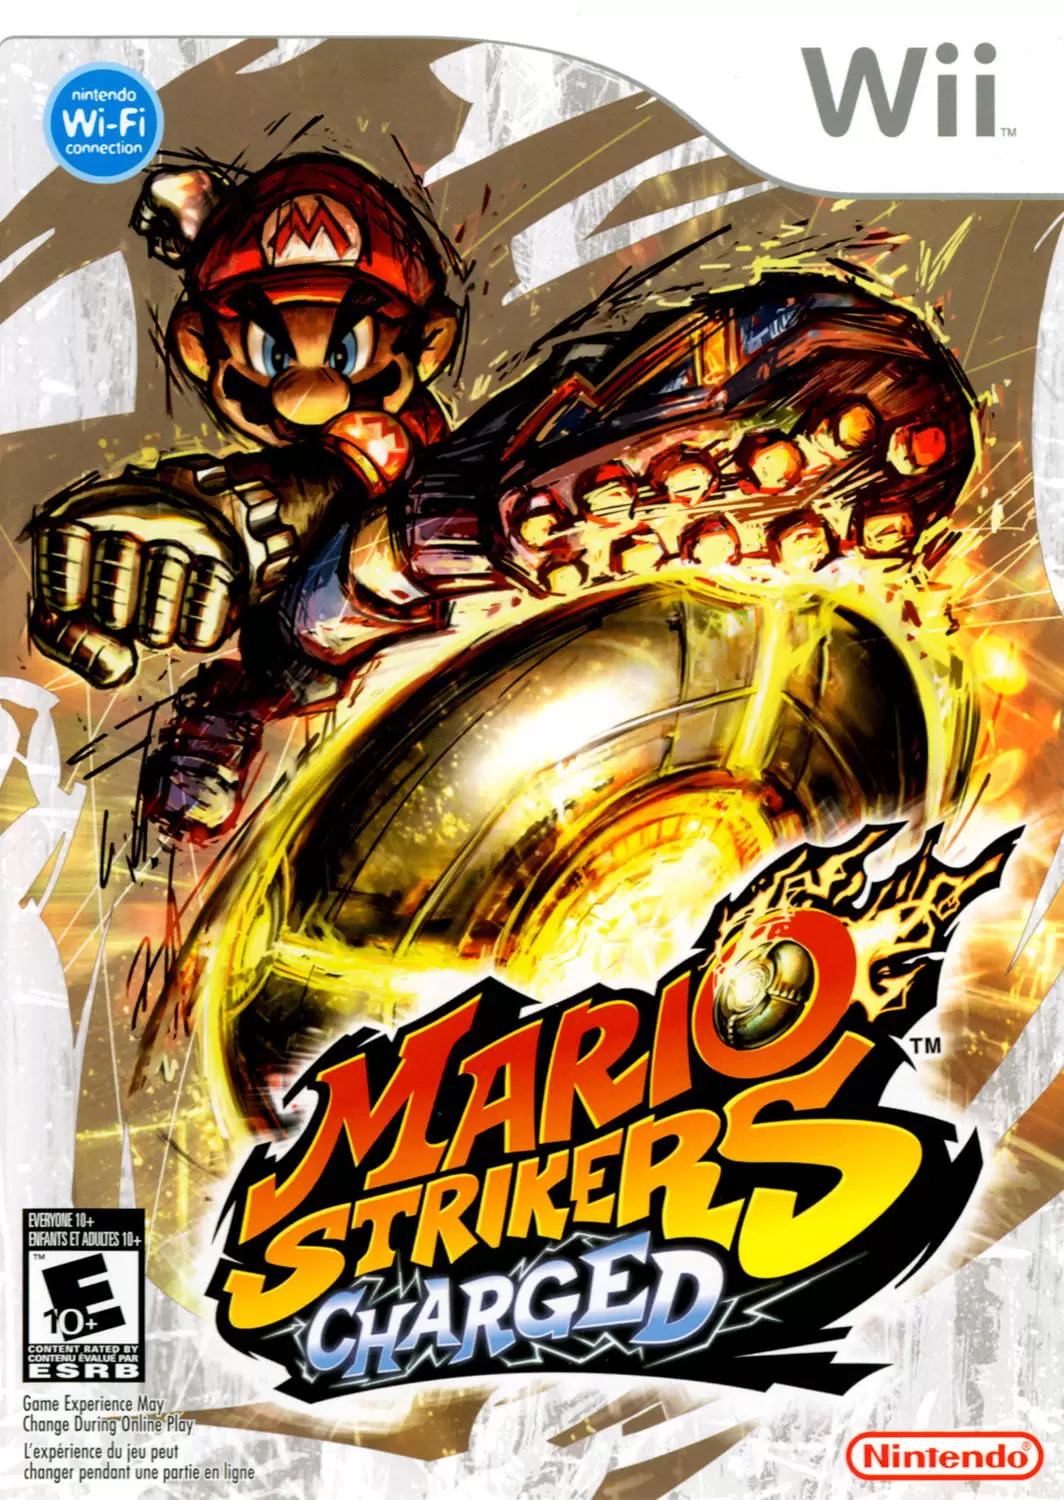 Nintendo Wii Games - Mario Strikers Charged